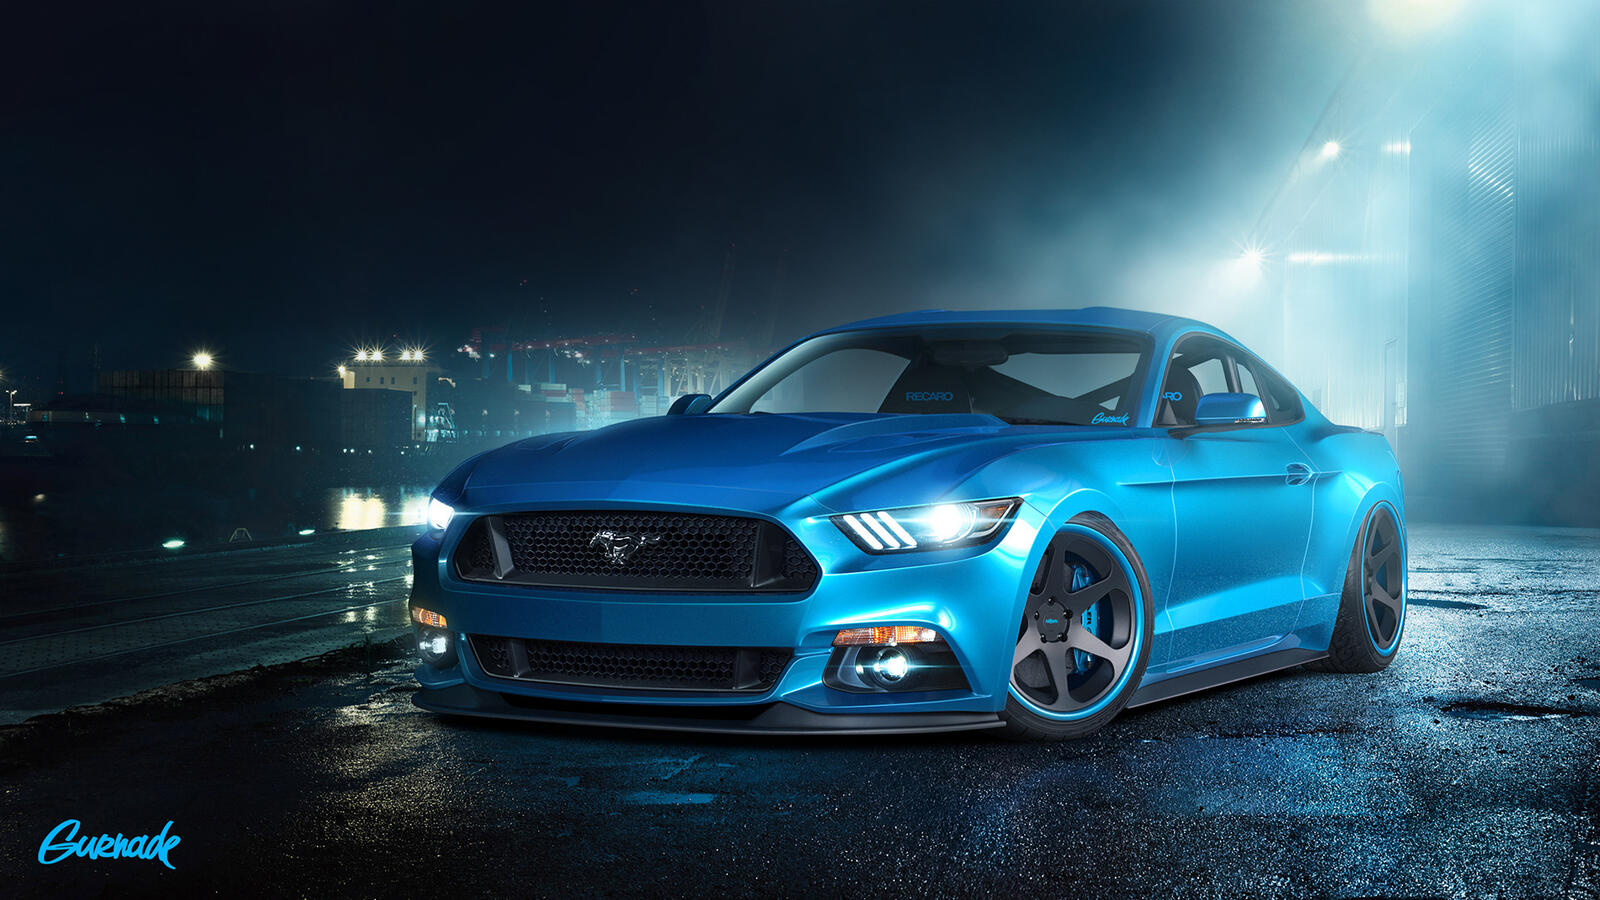 Wallpapers mustang blue night on the desktop